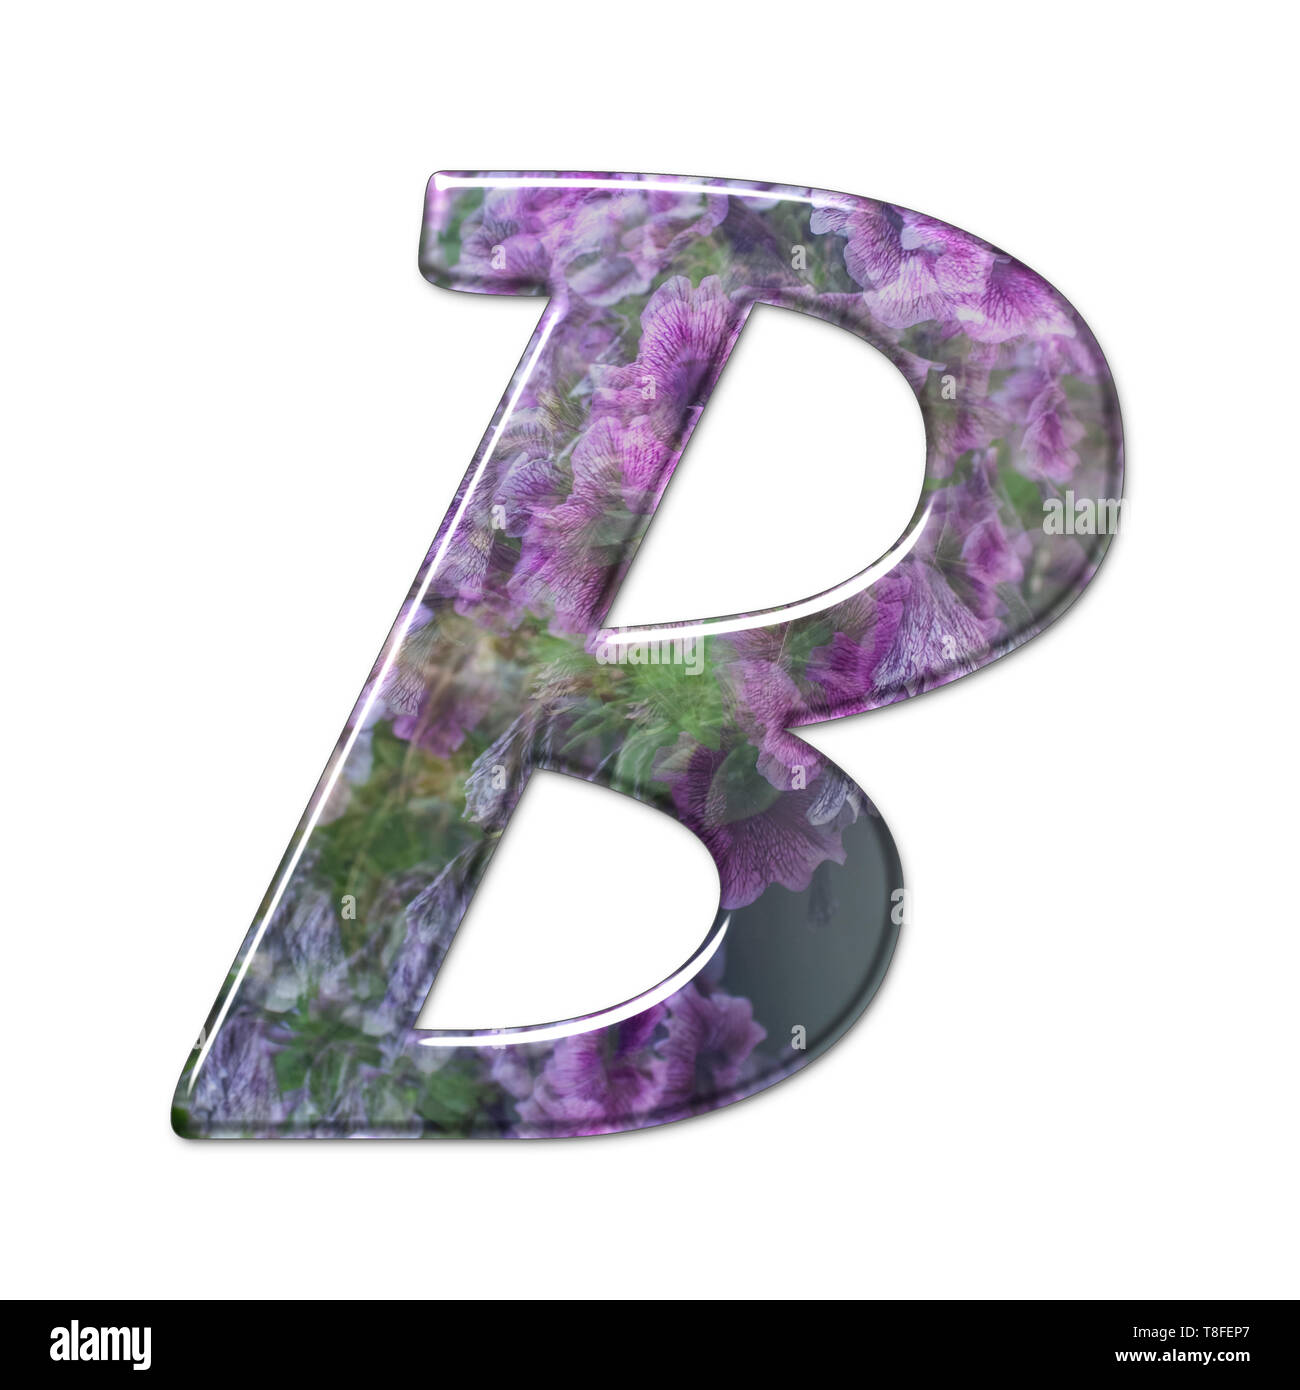 The Capitol Letter B Part of a set of letters, Numbers and symbols of 3D Alphabet made with a floral image on white background Stock Photo